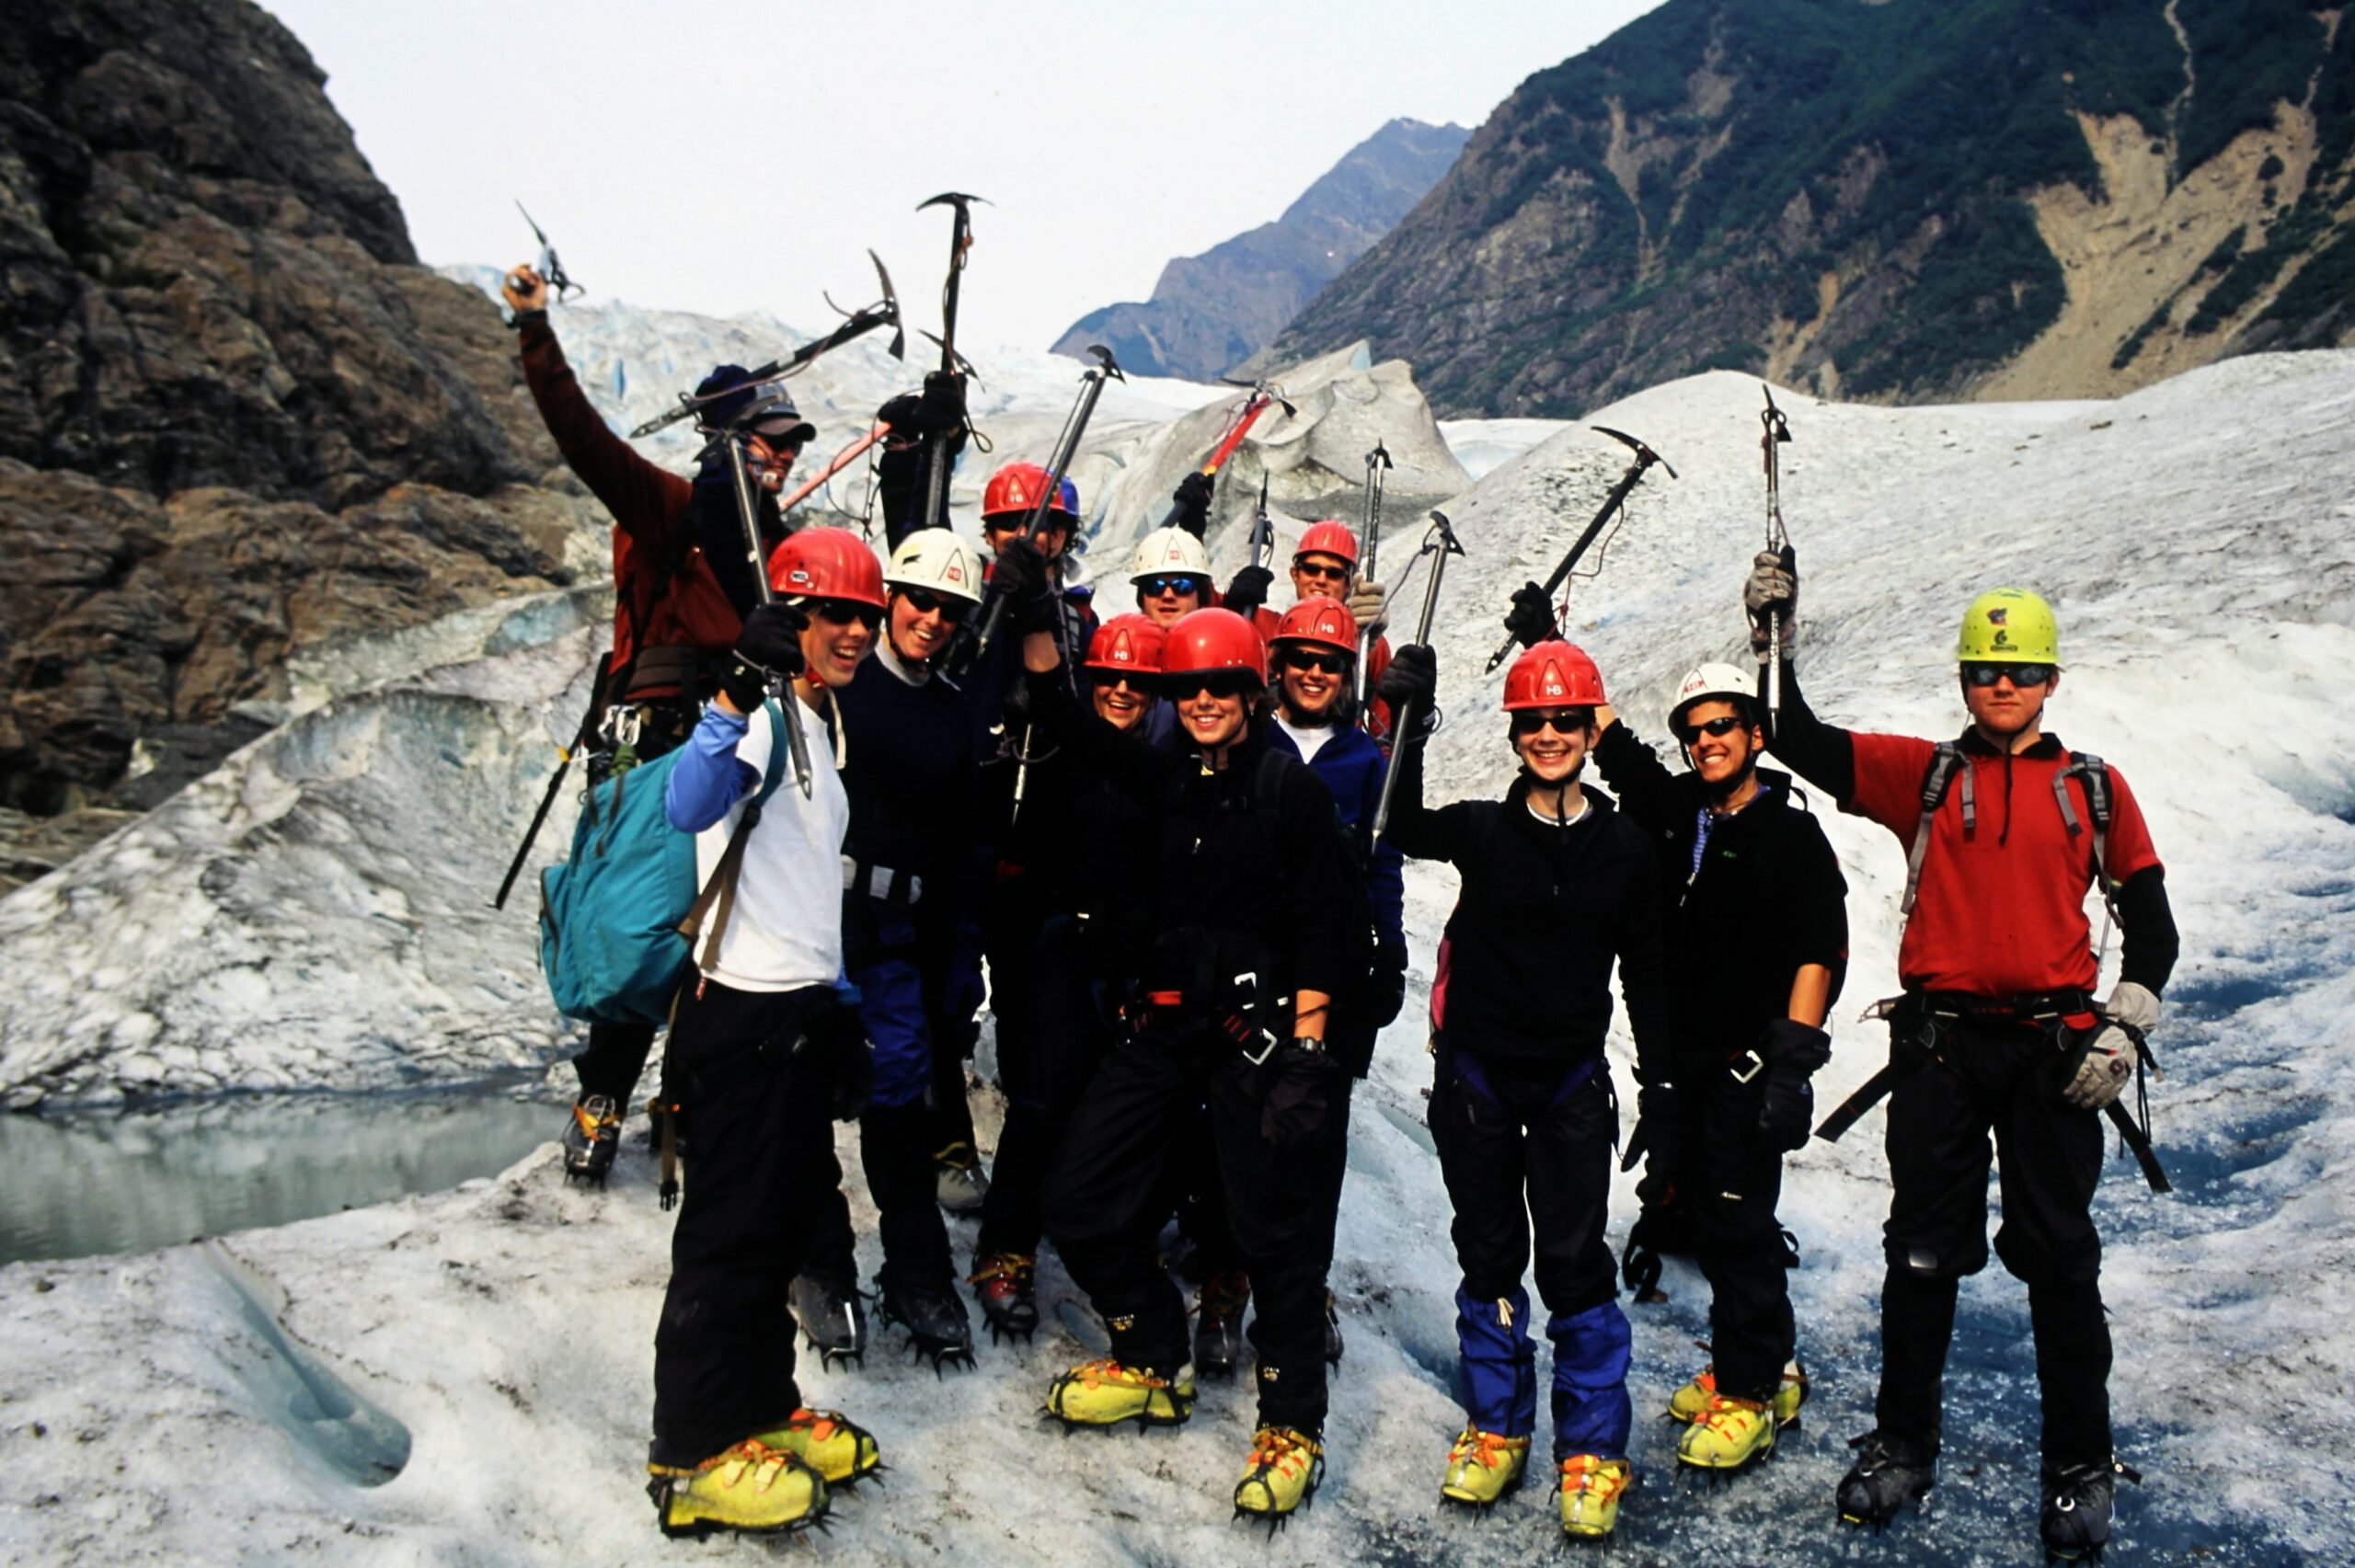 2004 Group with Ice Axes